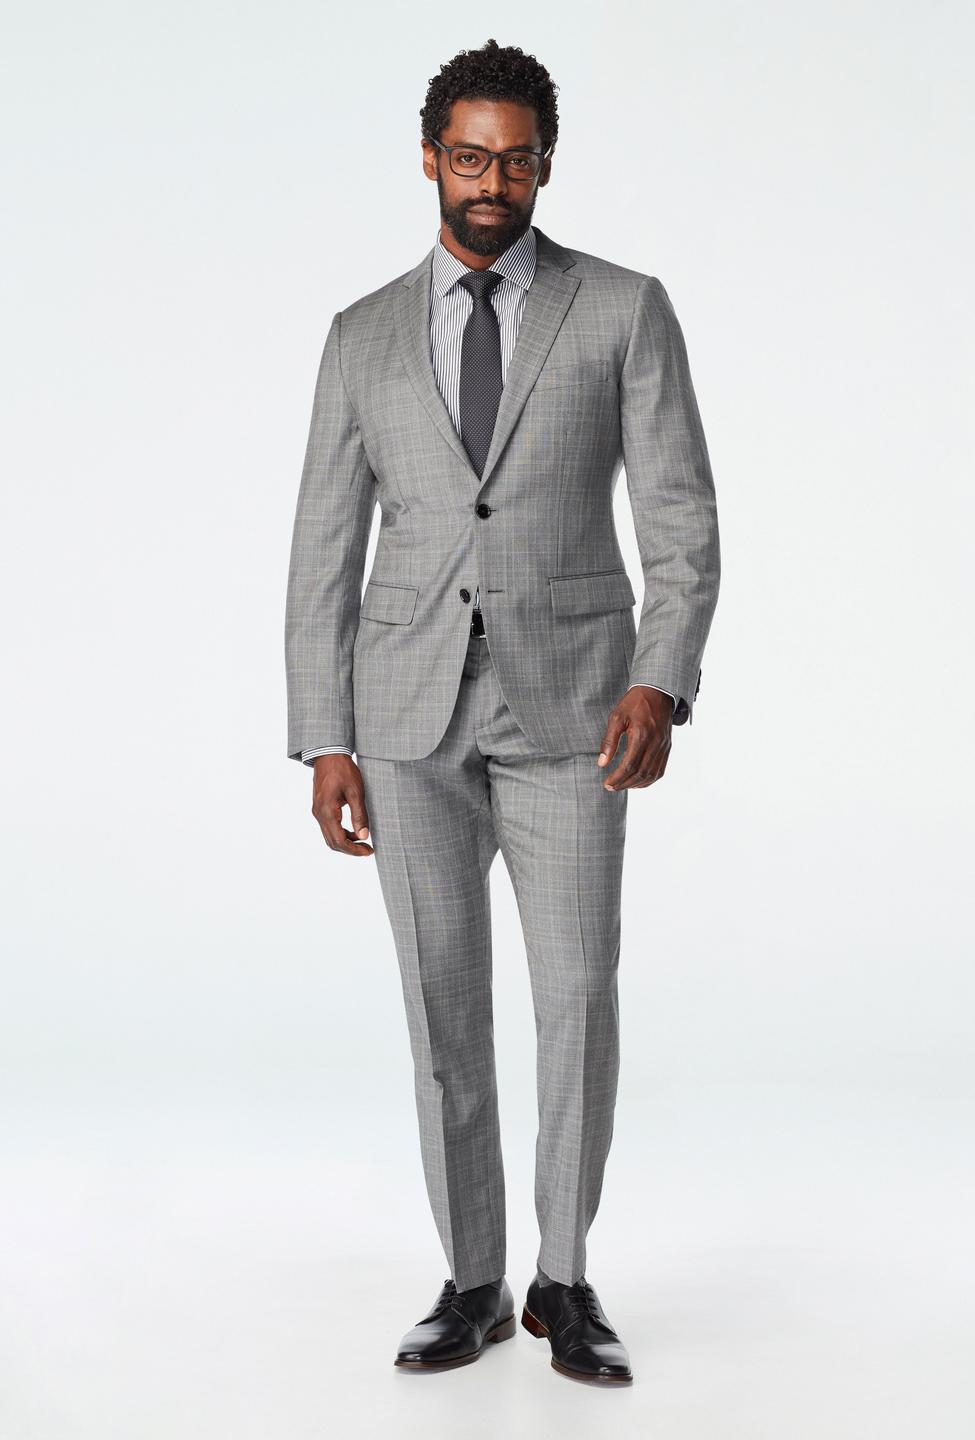 Gray suit - Harrogate Checked Design from Luxury Indochino Collection